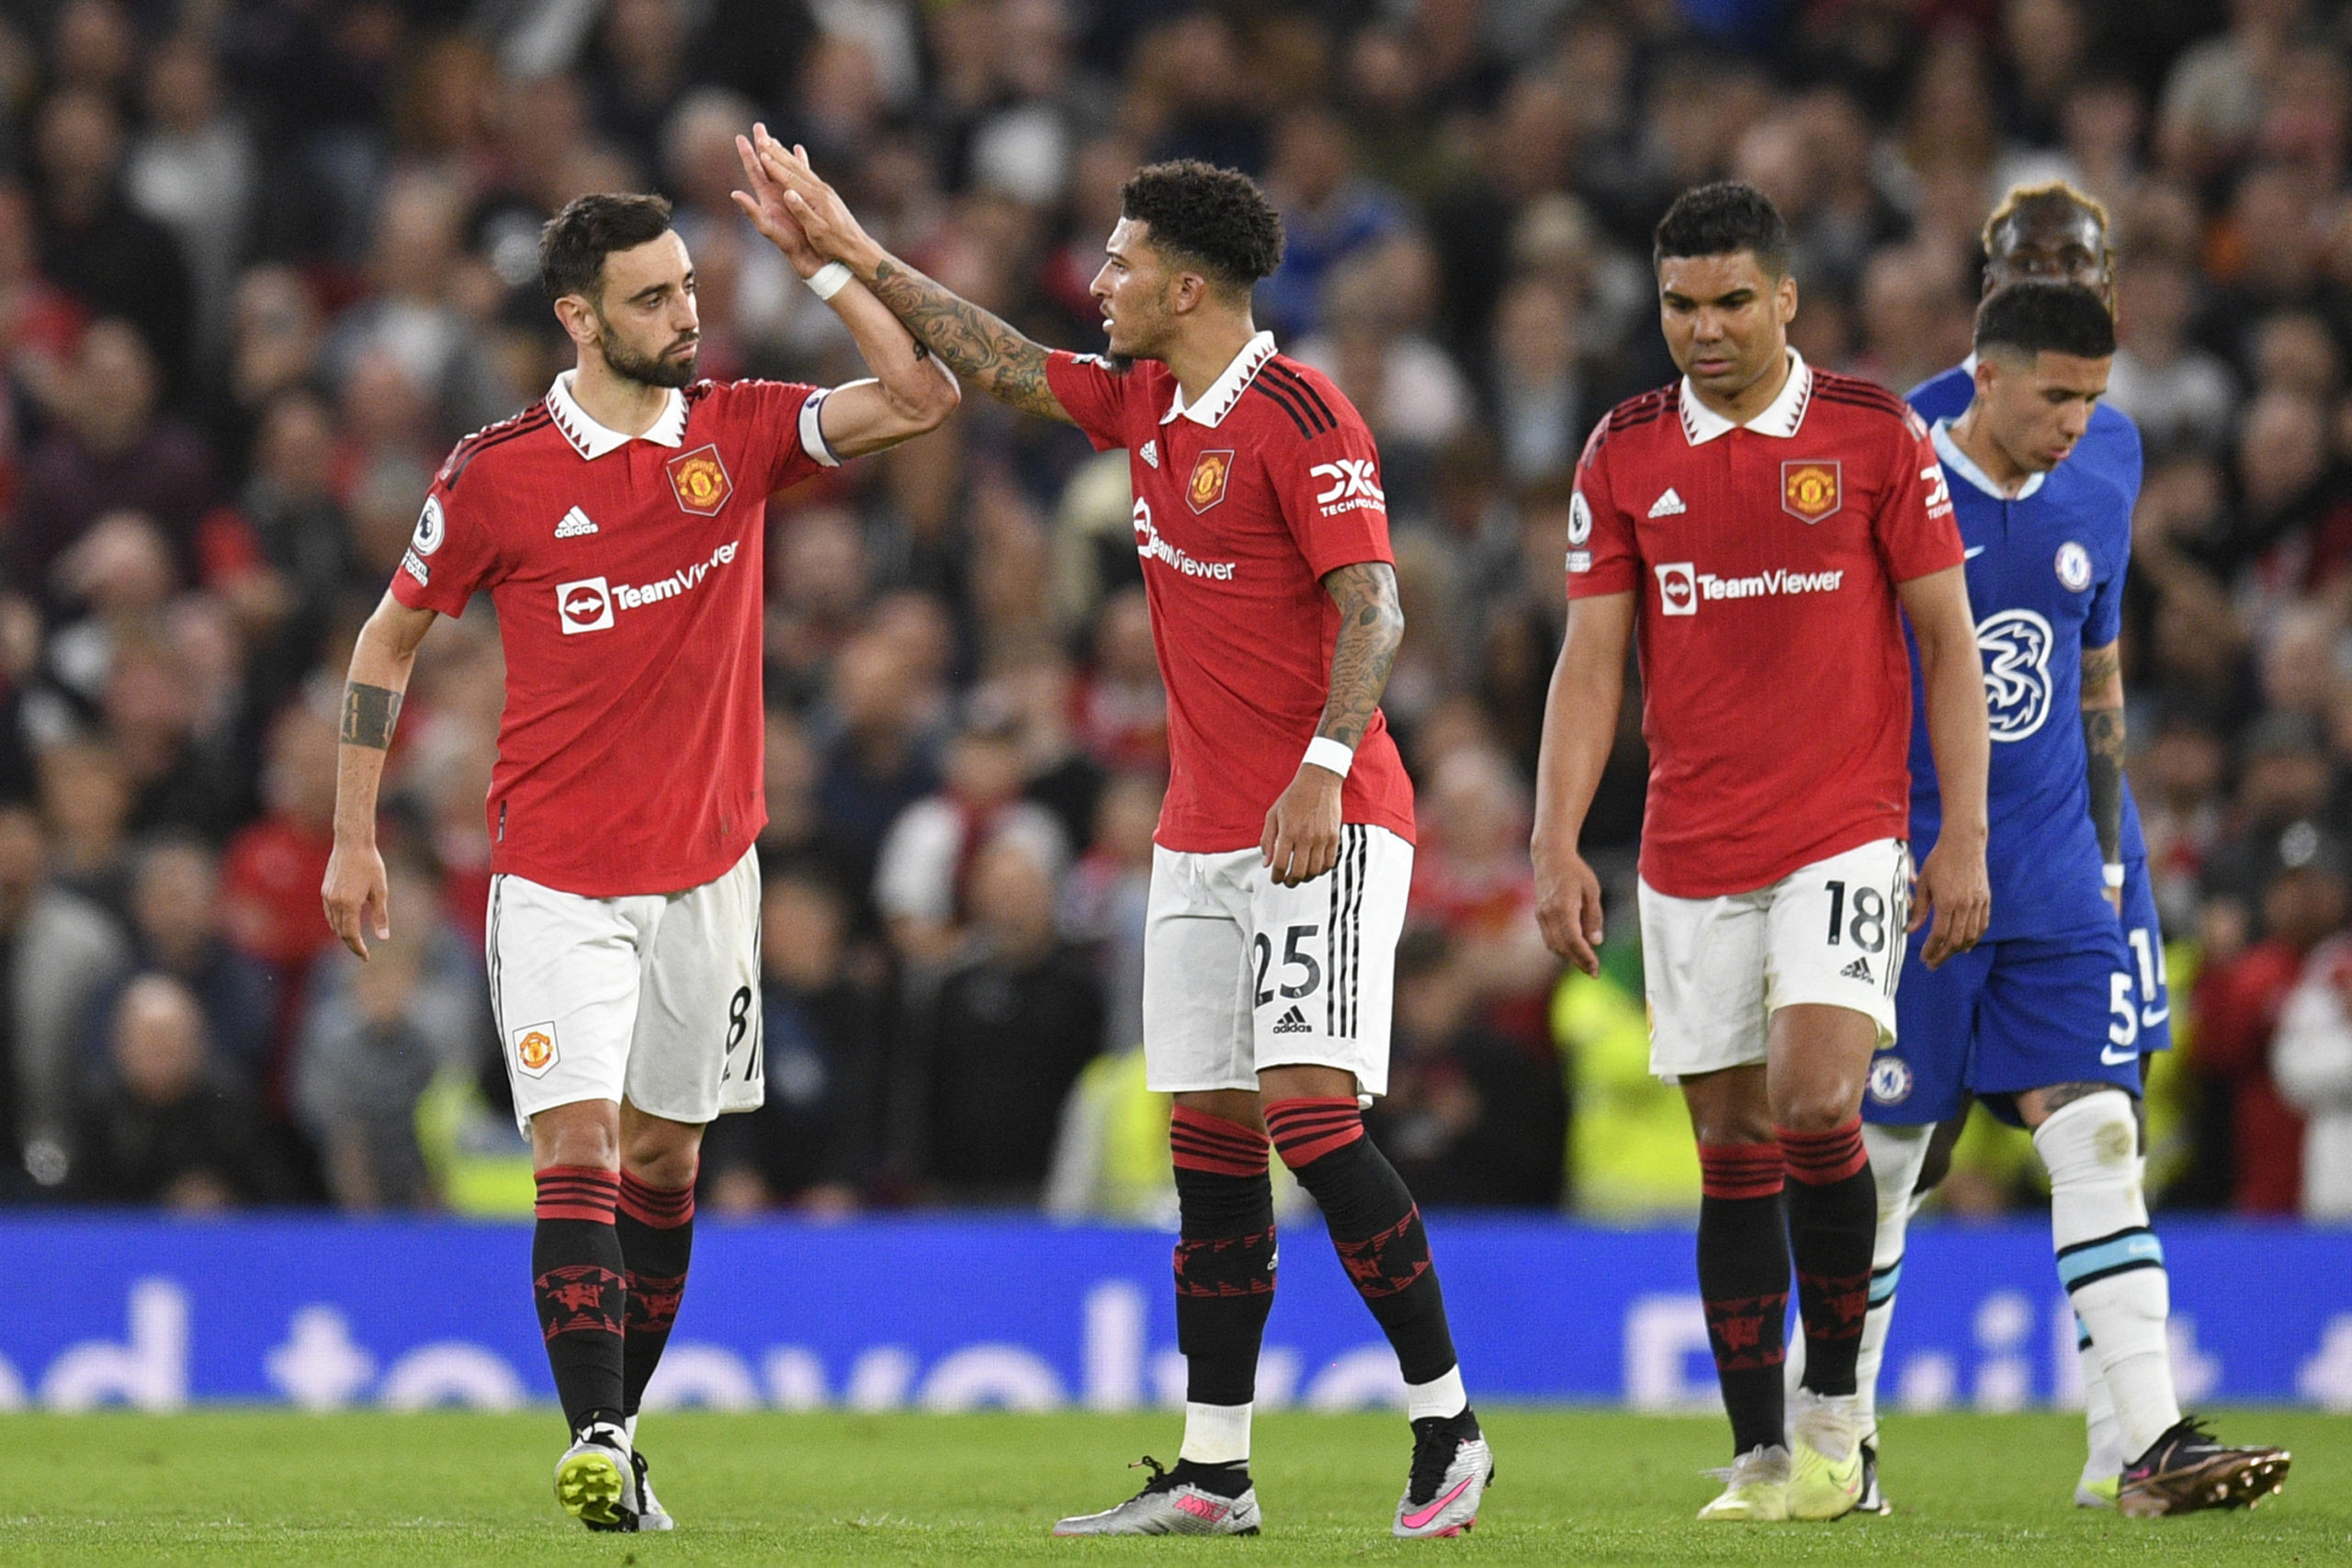 Man Utd's UCL return clouded by ownership uncertainty